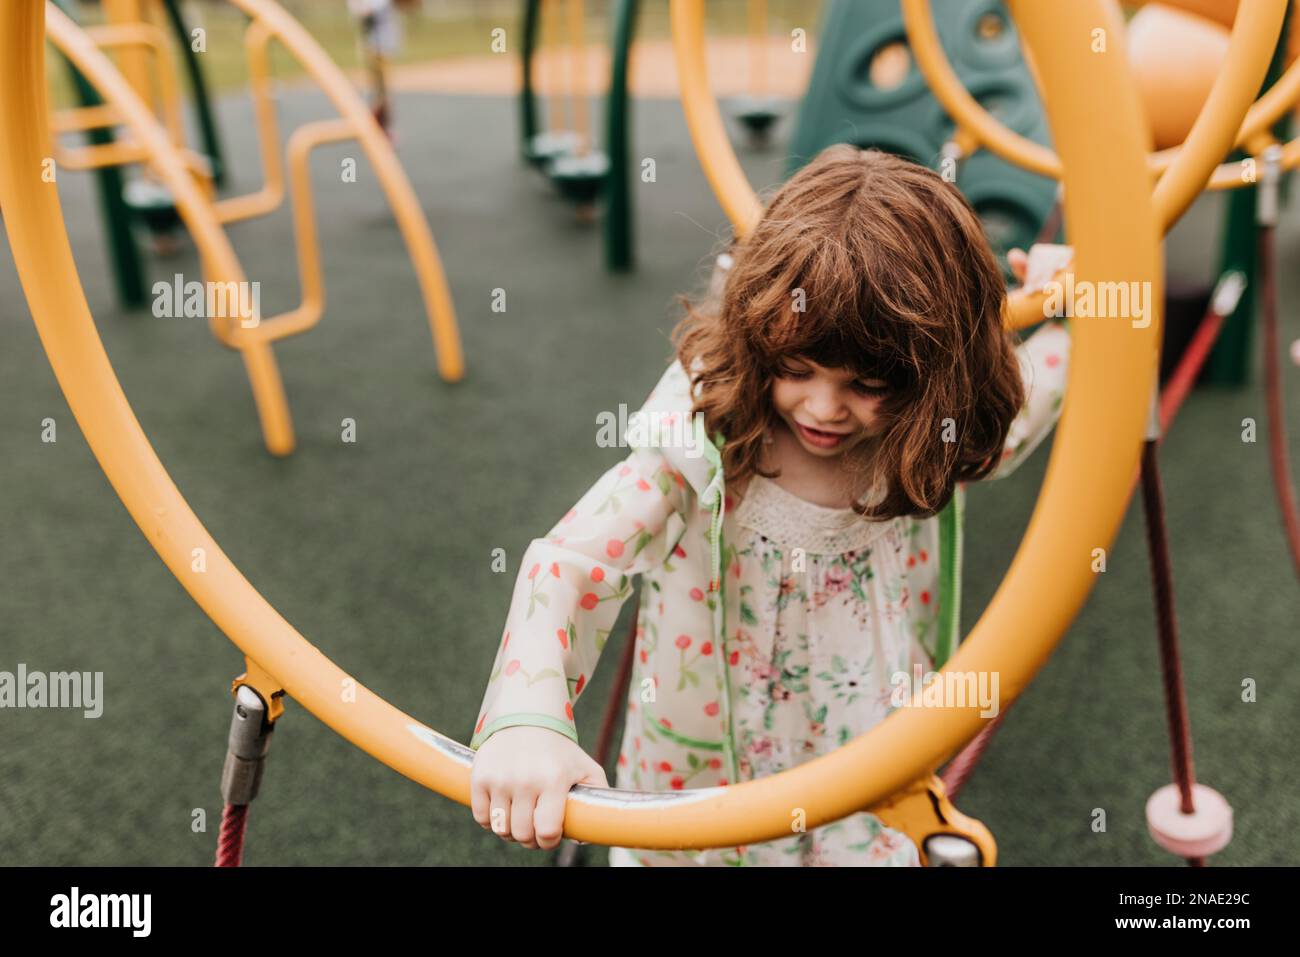 Young girl plays on playground equipment at park on cloudy day Stock Photo